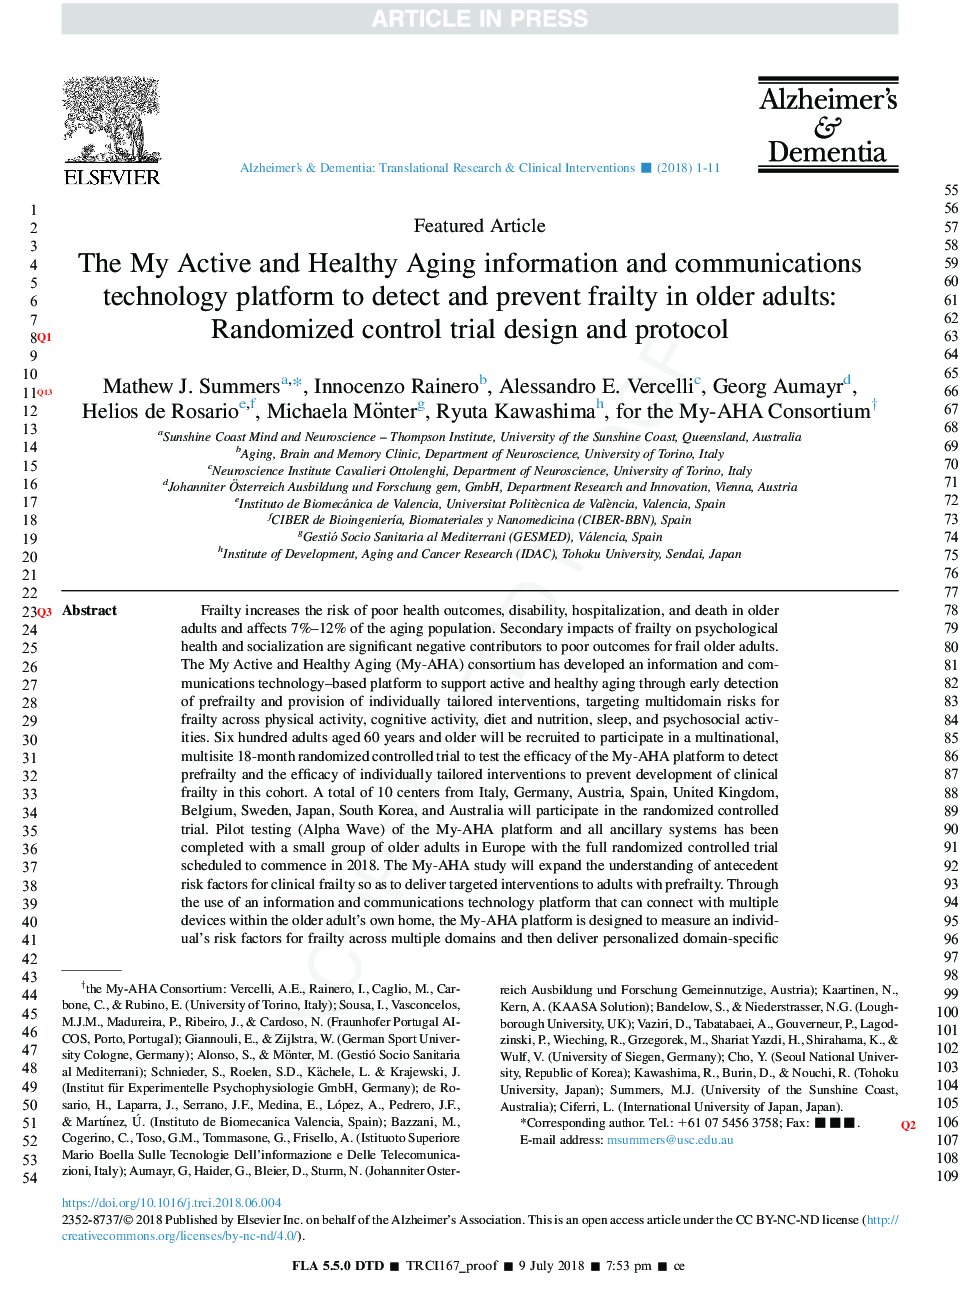 The My Active and Healthy Aging (My-AHA) ICT platform to detect and prevent frailty in older adults: Randomized control trial design and protocol